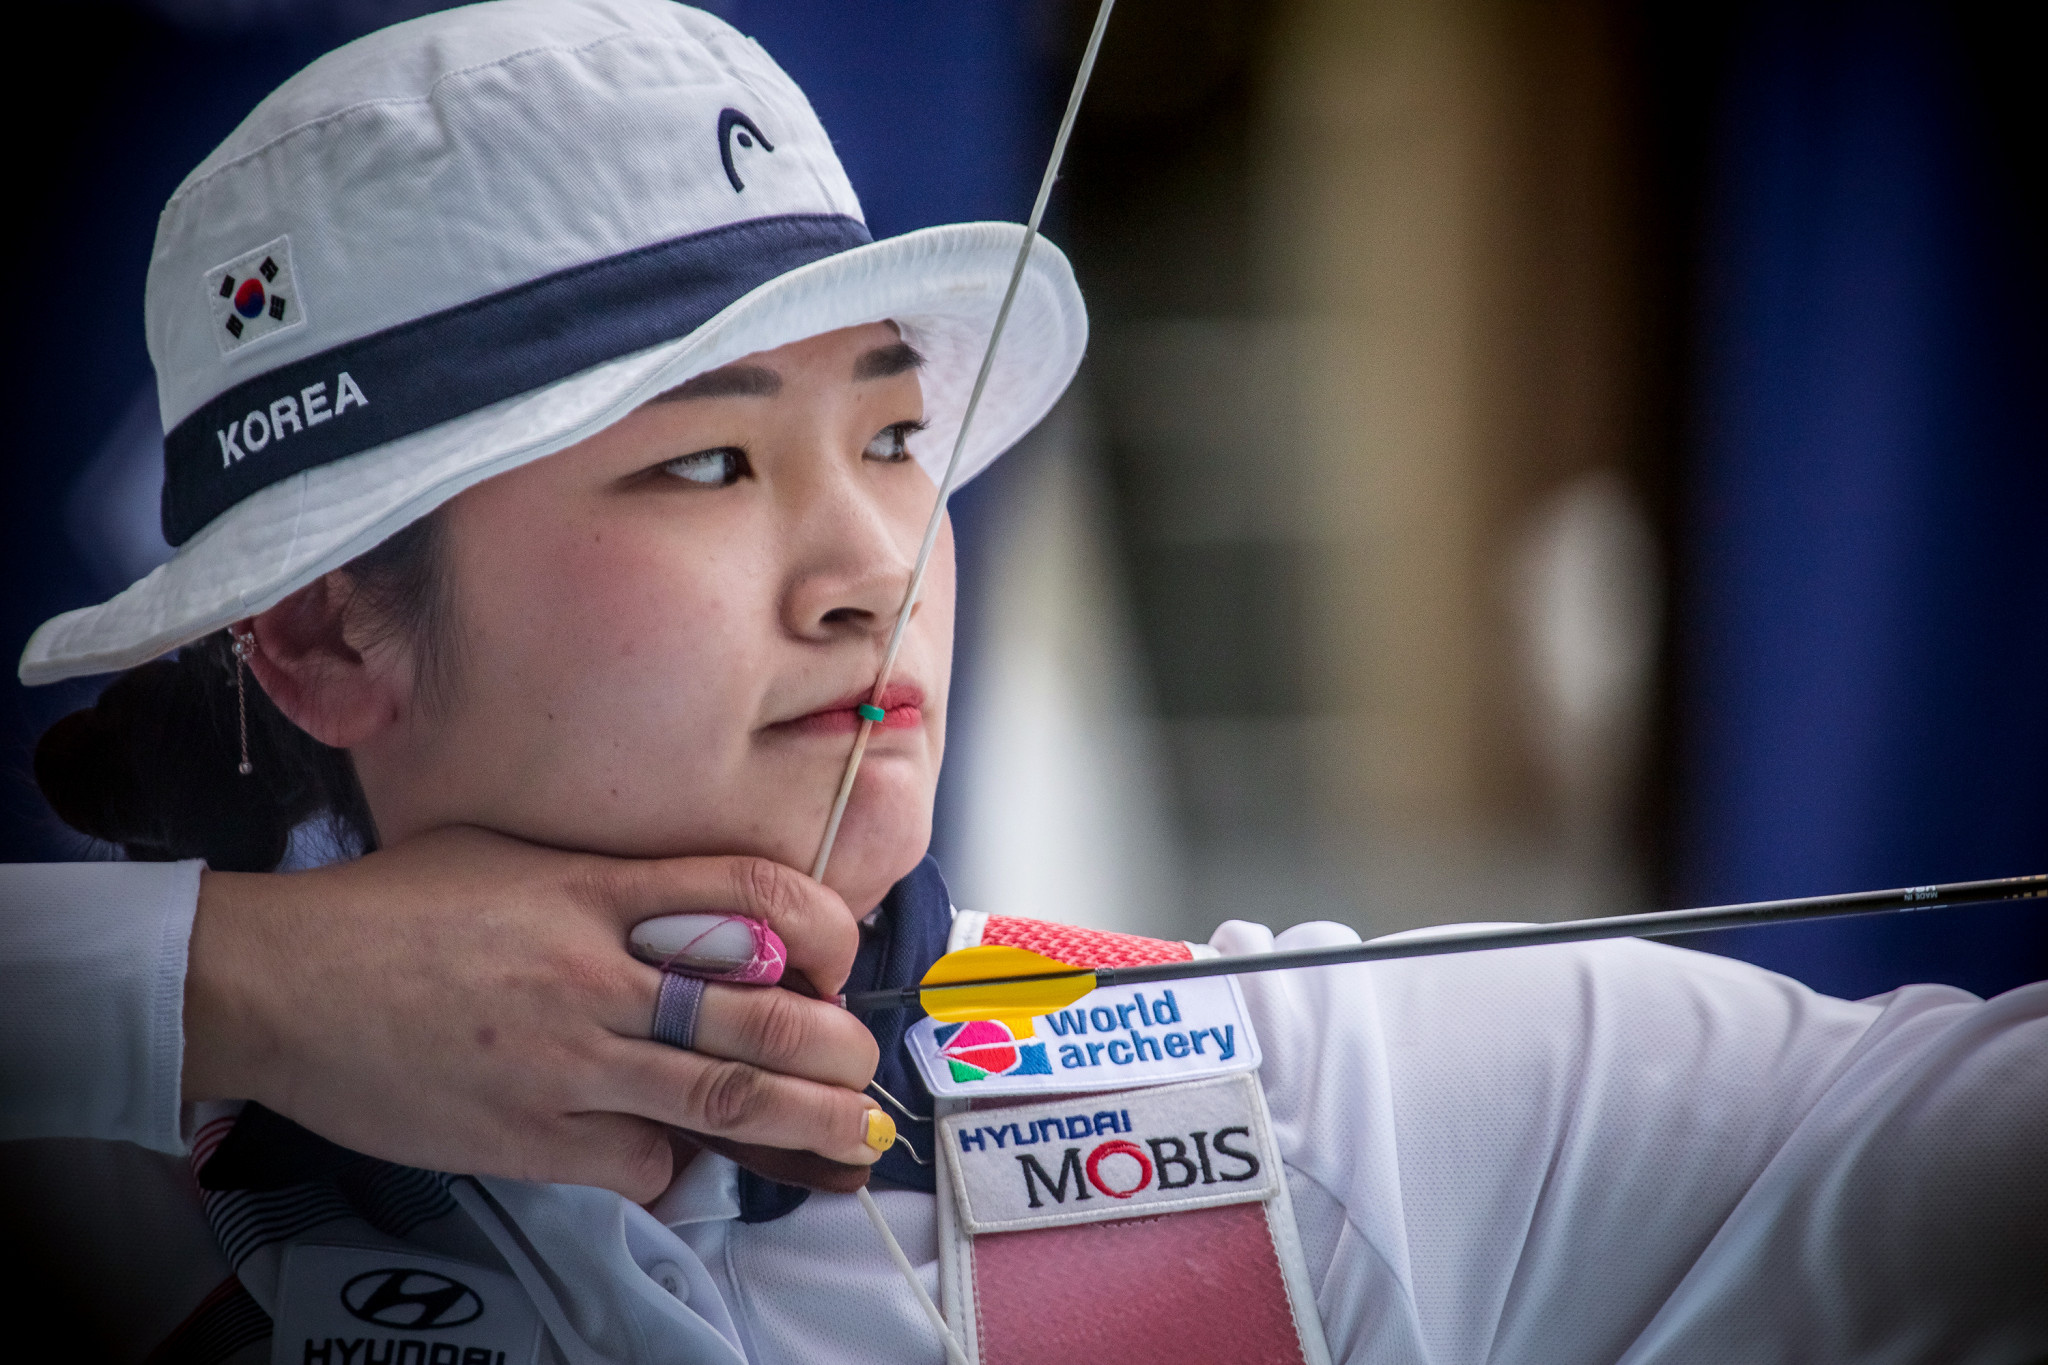 Recurve world number one Kang tops first round of Asian Archery Championships